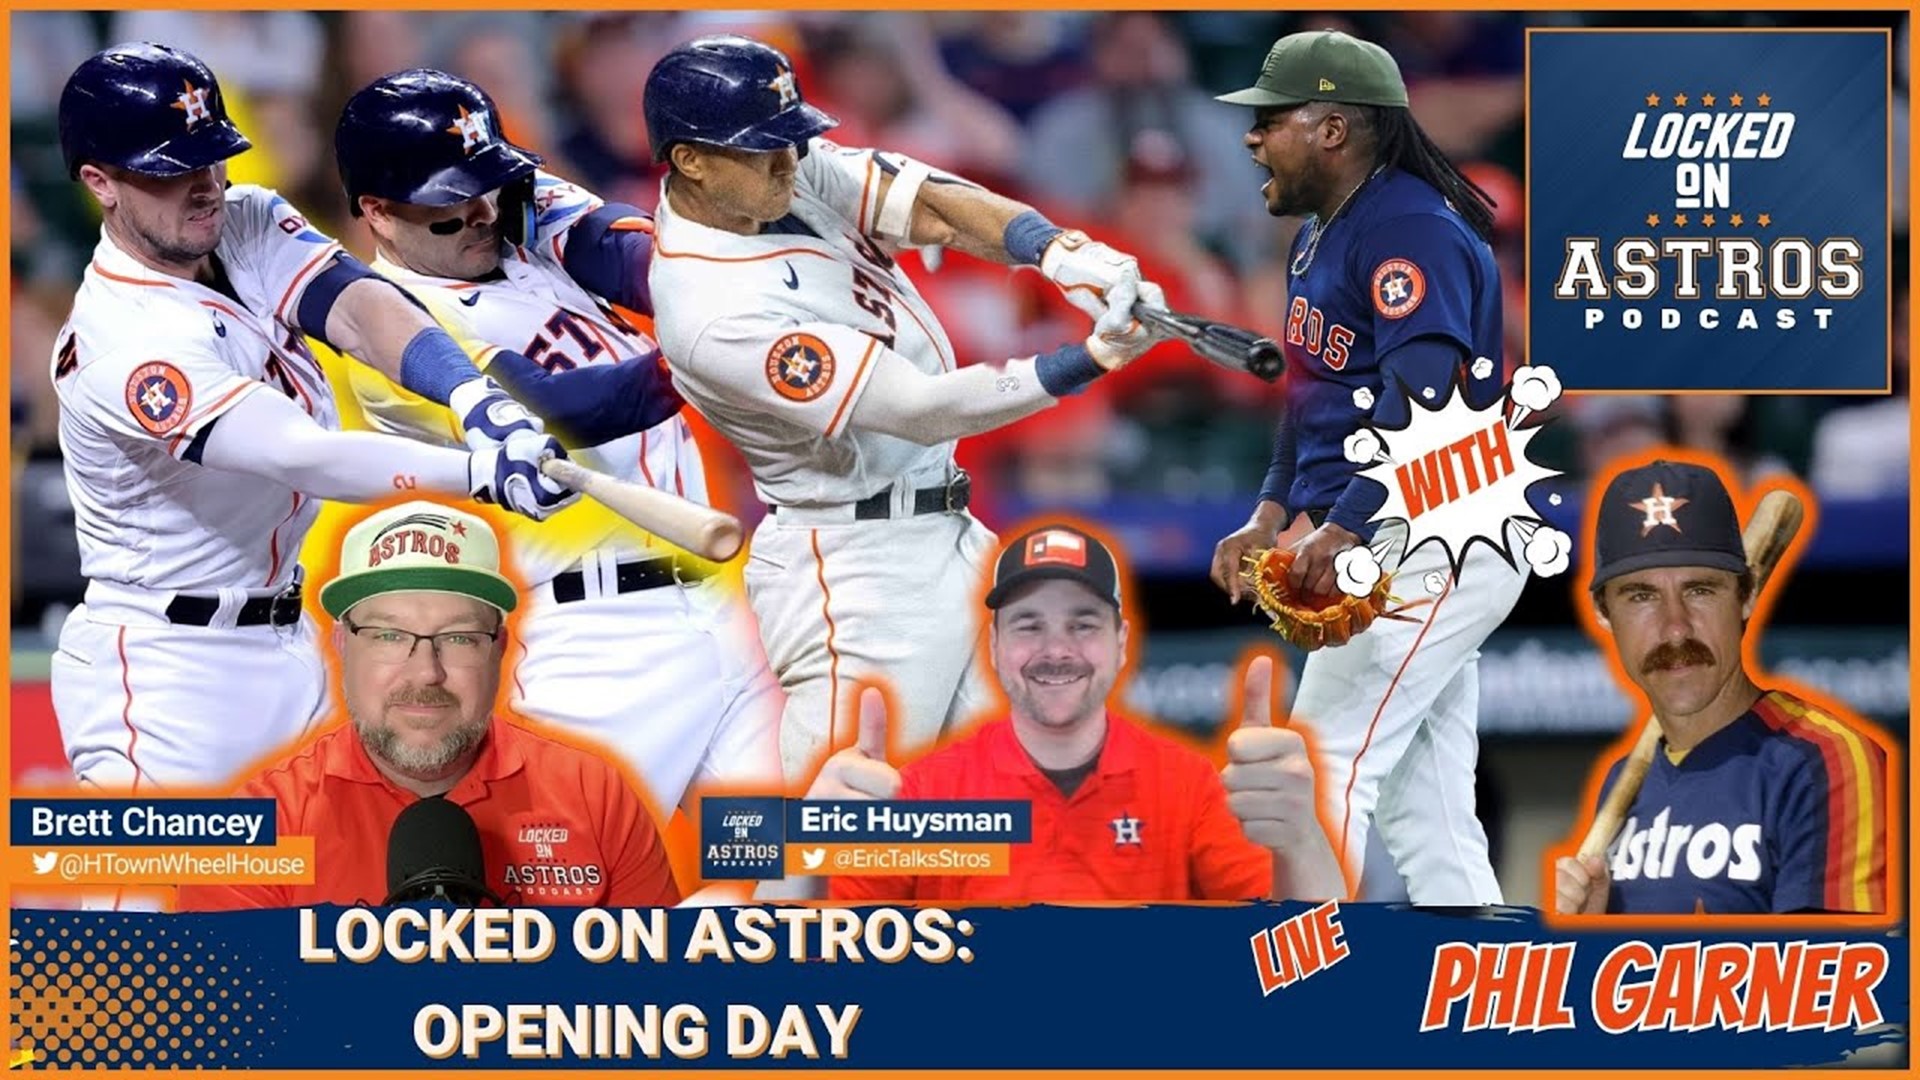 Astros: Phil Garner Joins the Show on the Eve of Opening Day!